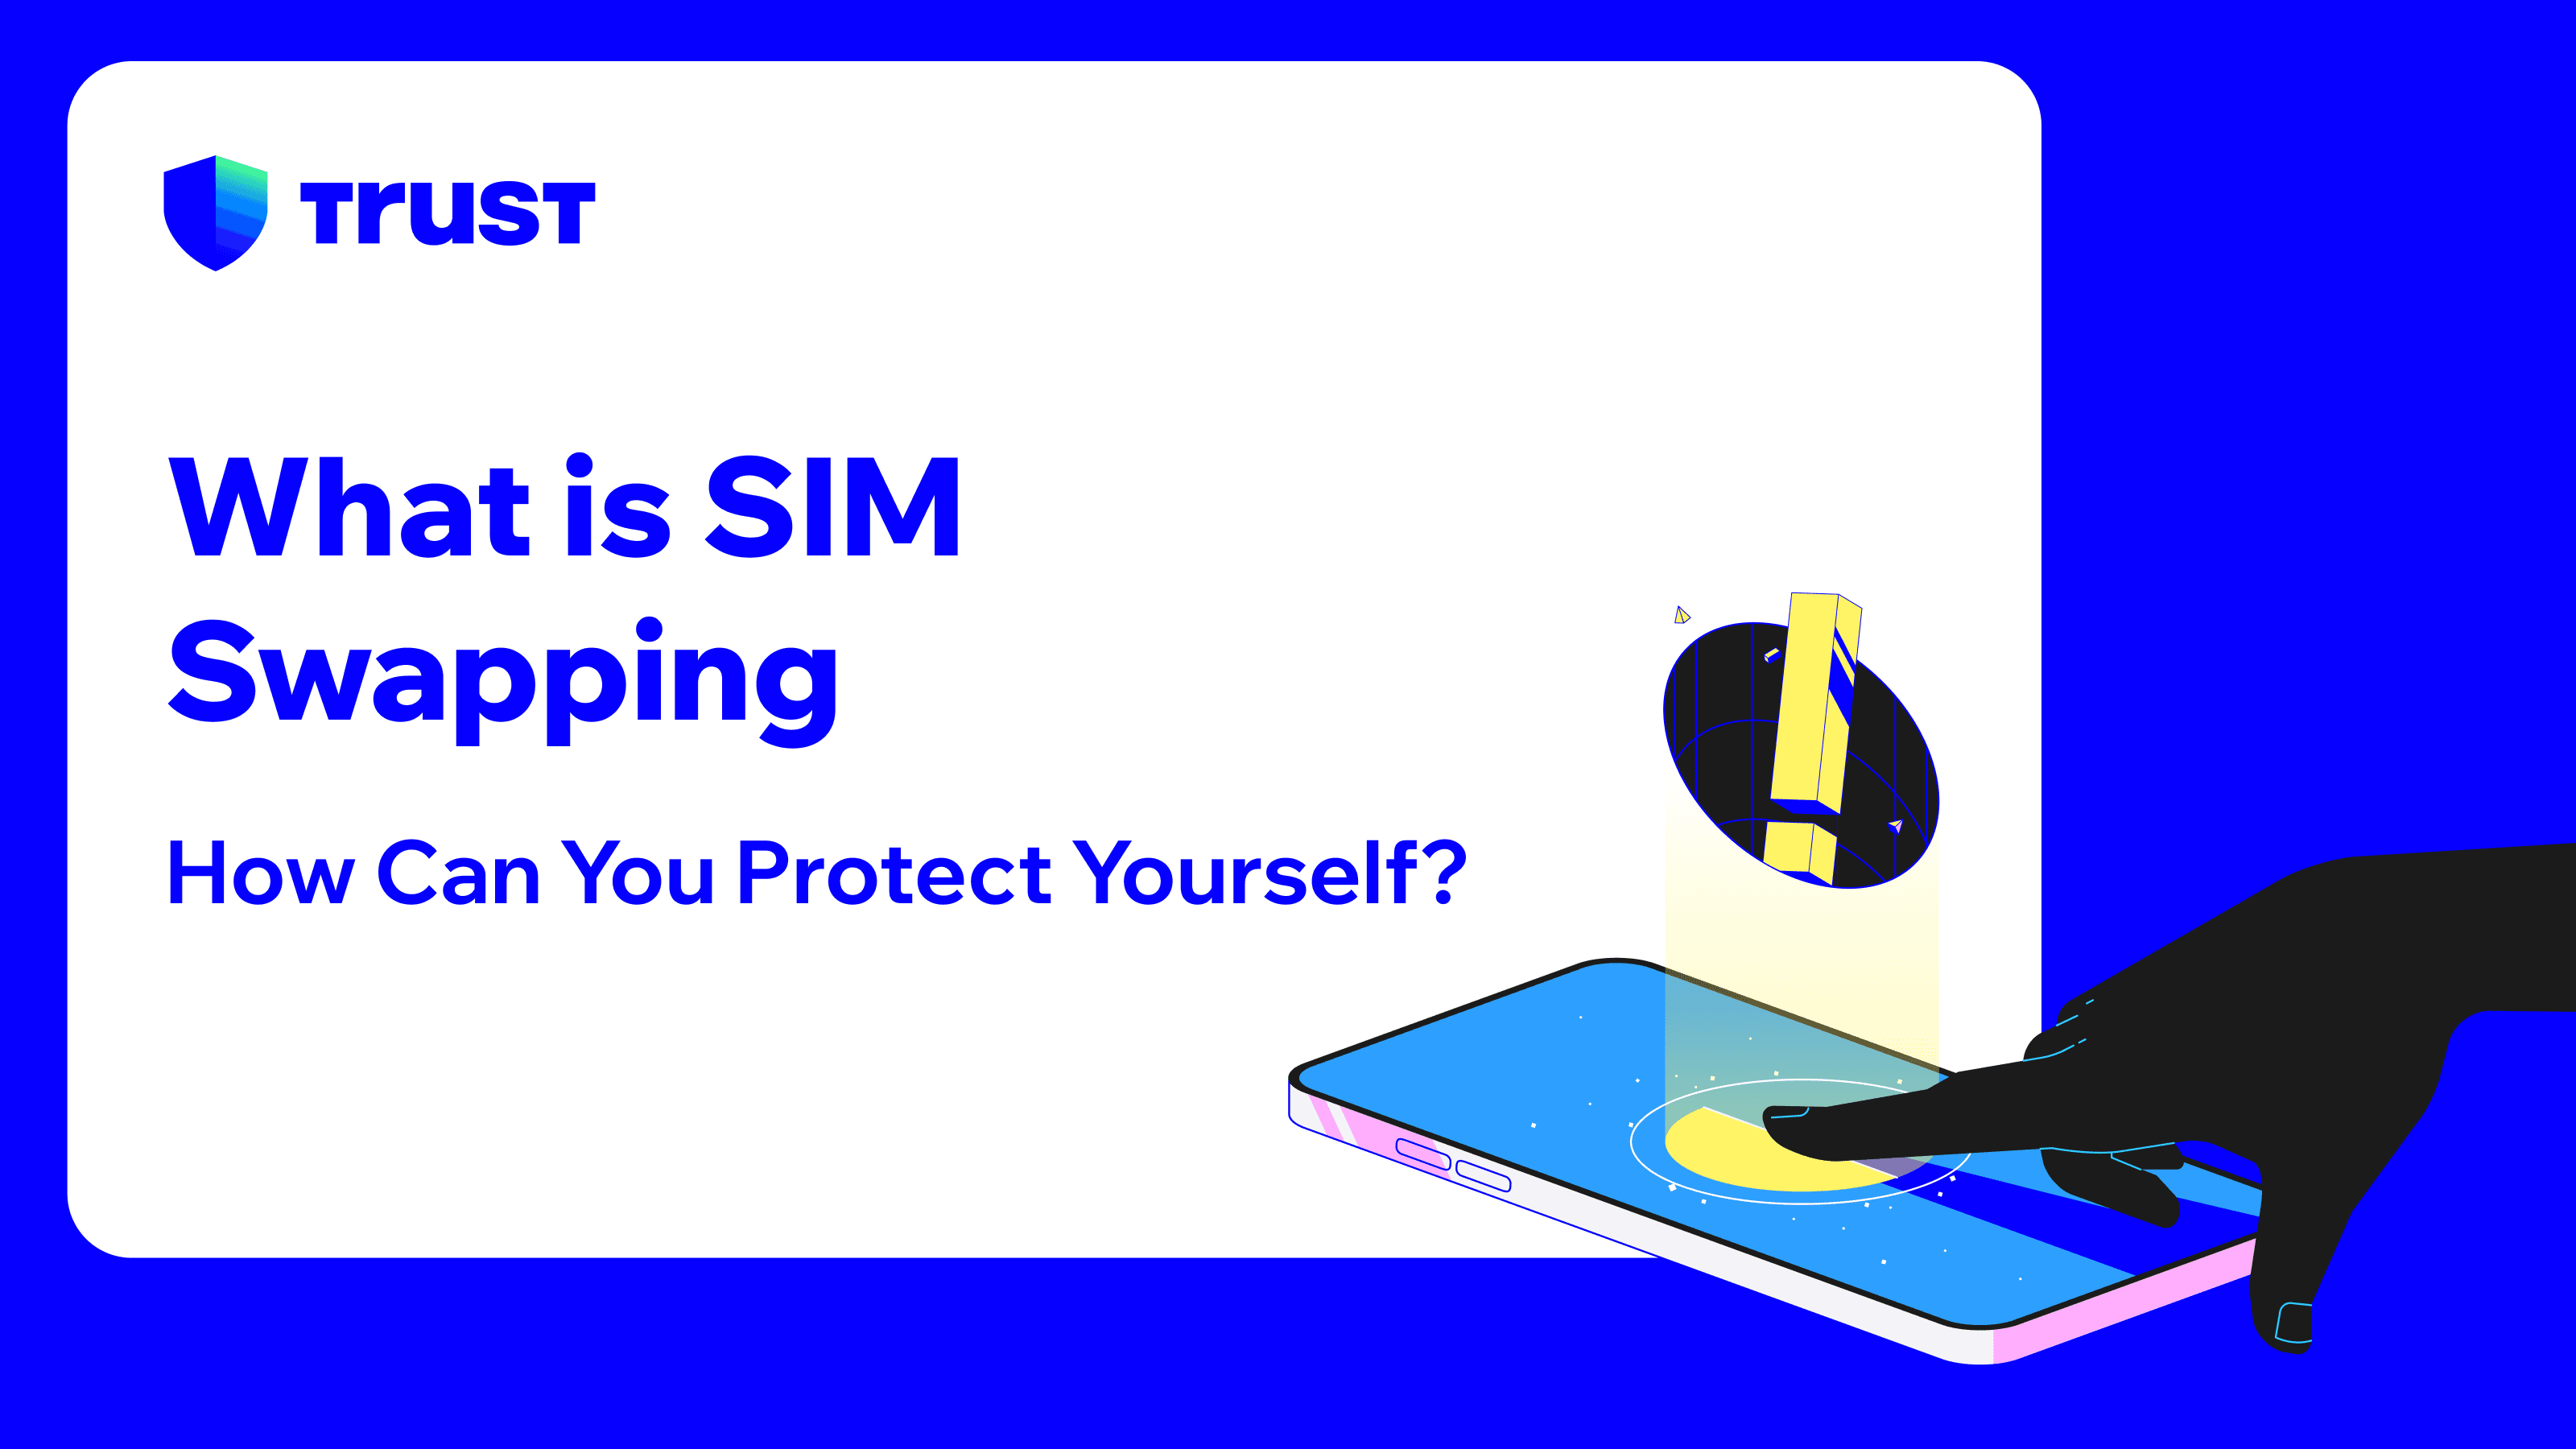 What is SIM Swapping and How Can You Protect Yourself?